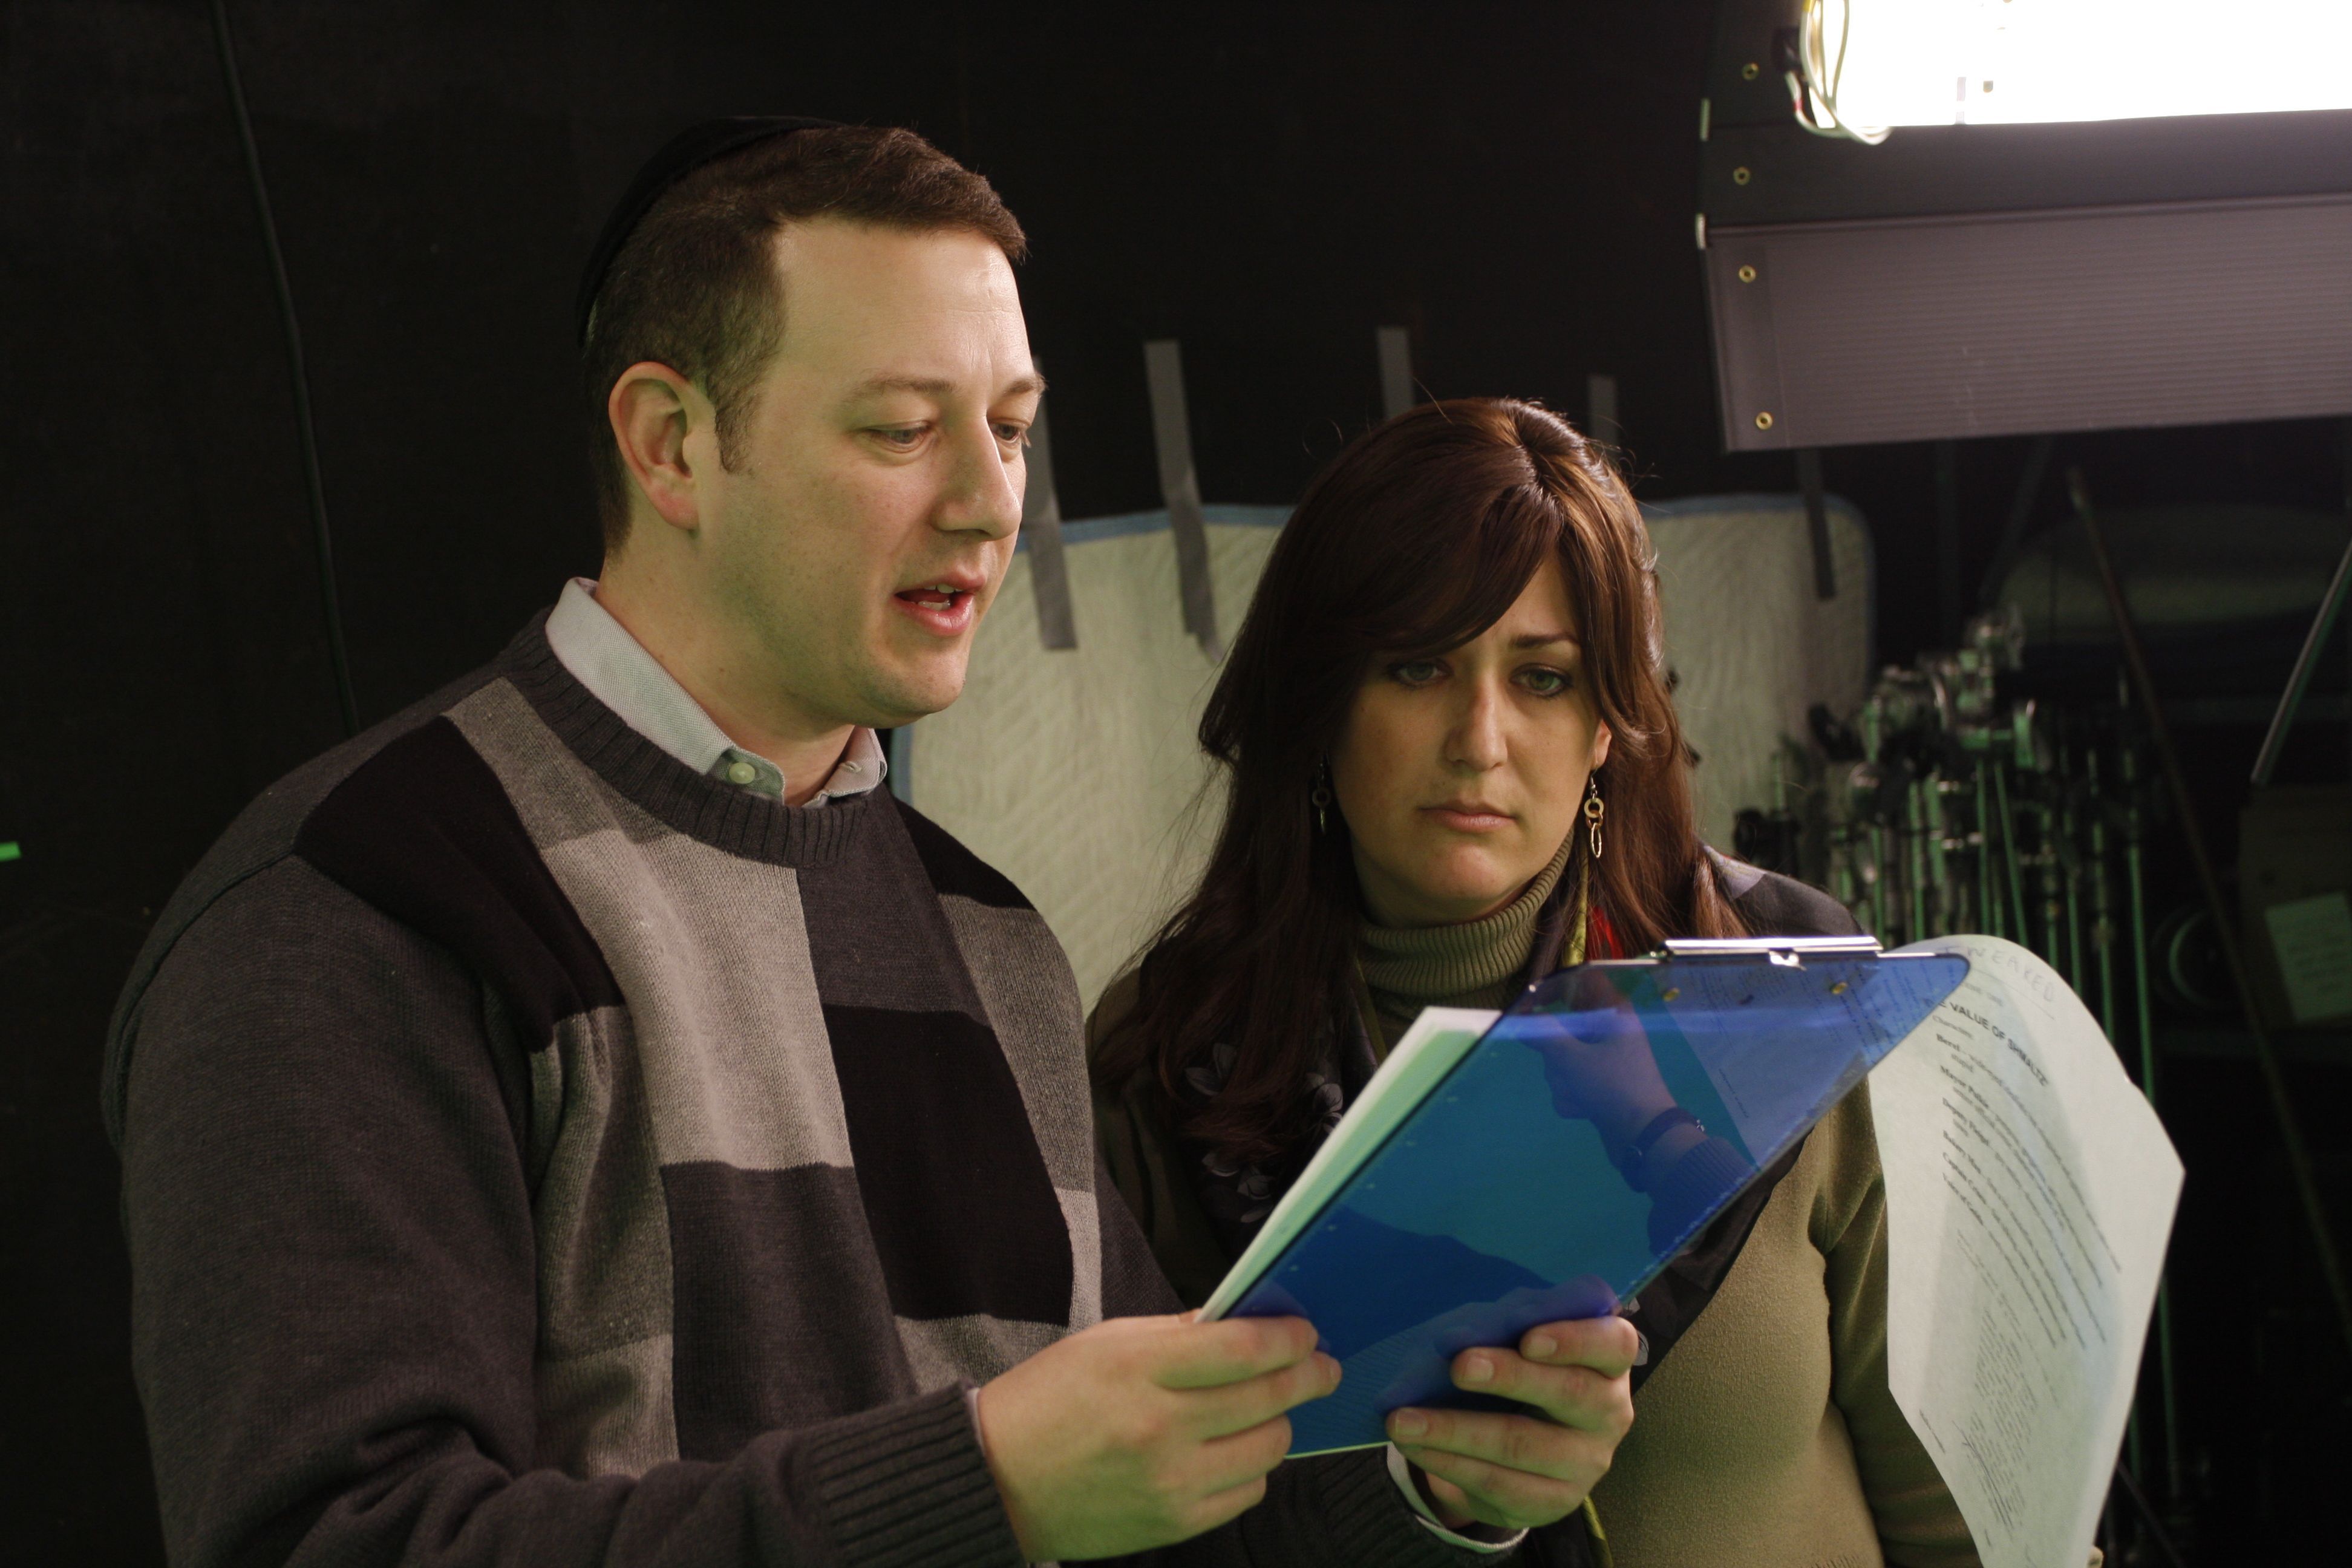 Reviewing screenplay at the set with writer Malka Leah Josephs